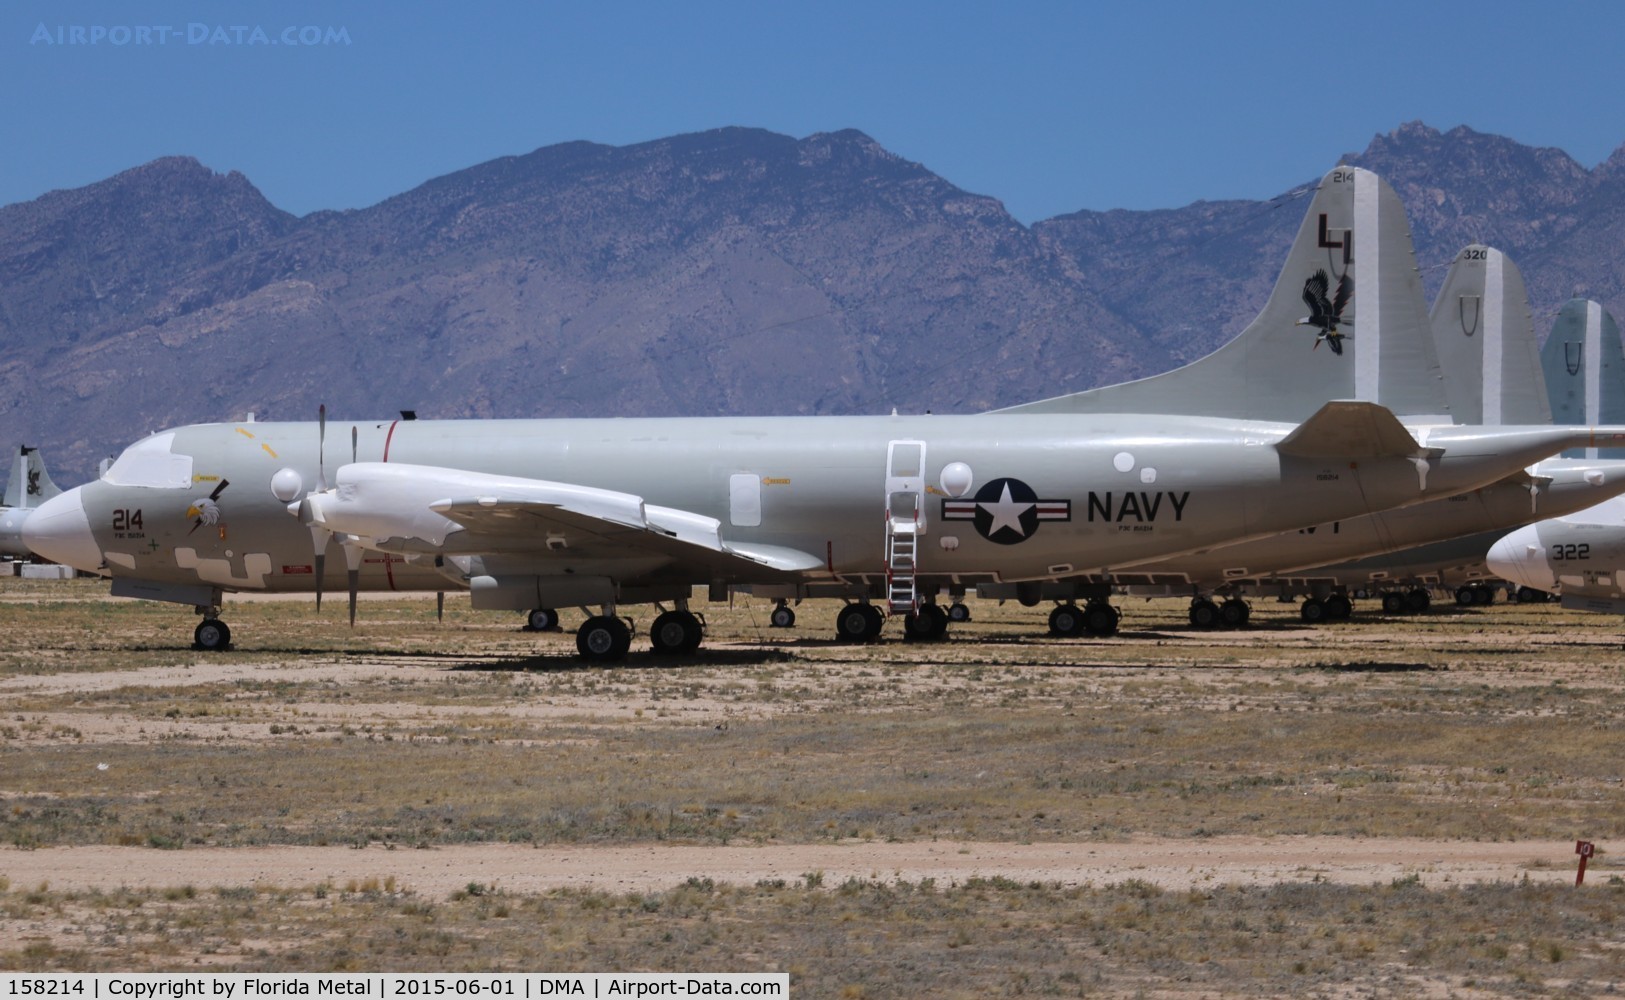 158214, Lockheed P-3C Orion C/N 285A-5559, P-3C Orion